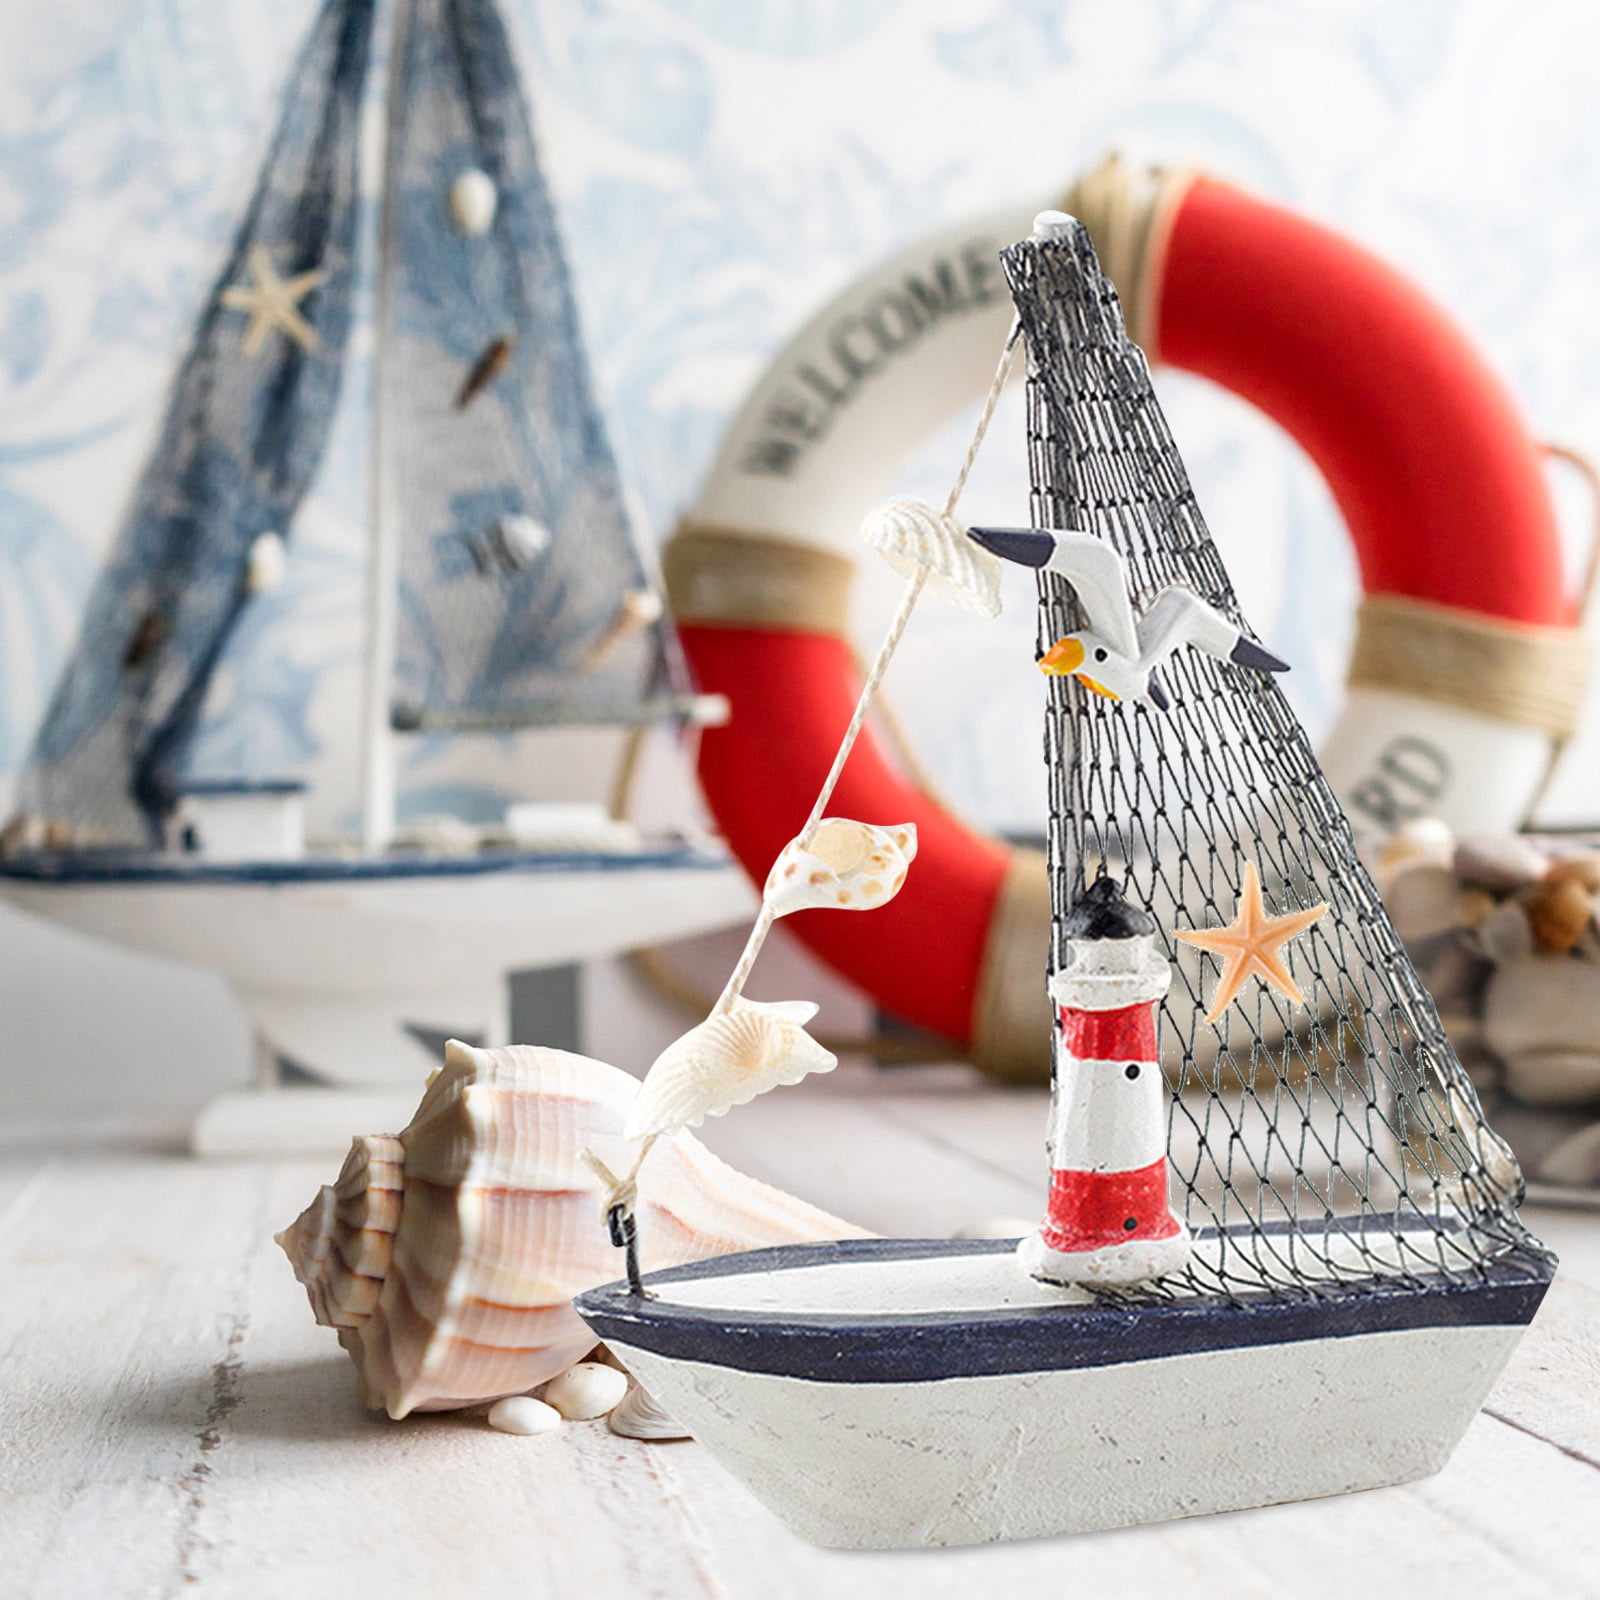 WEPRO Home Nautical Wooden Sailboat Ornament Beach Decoration Retro Wooden  Sailboat Beach Ornament Kitchen Bathroom Office Party Center Decoration 